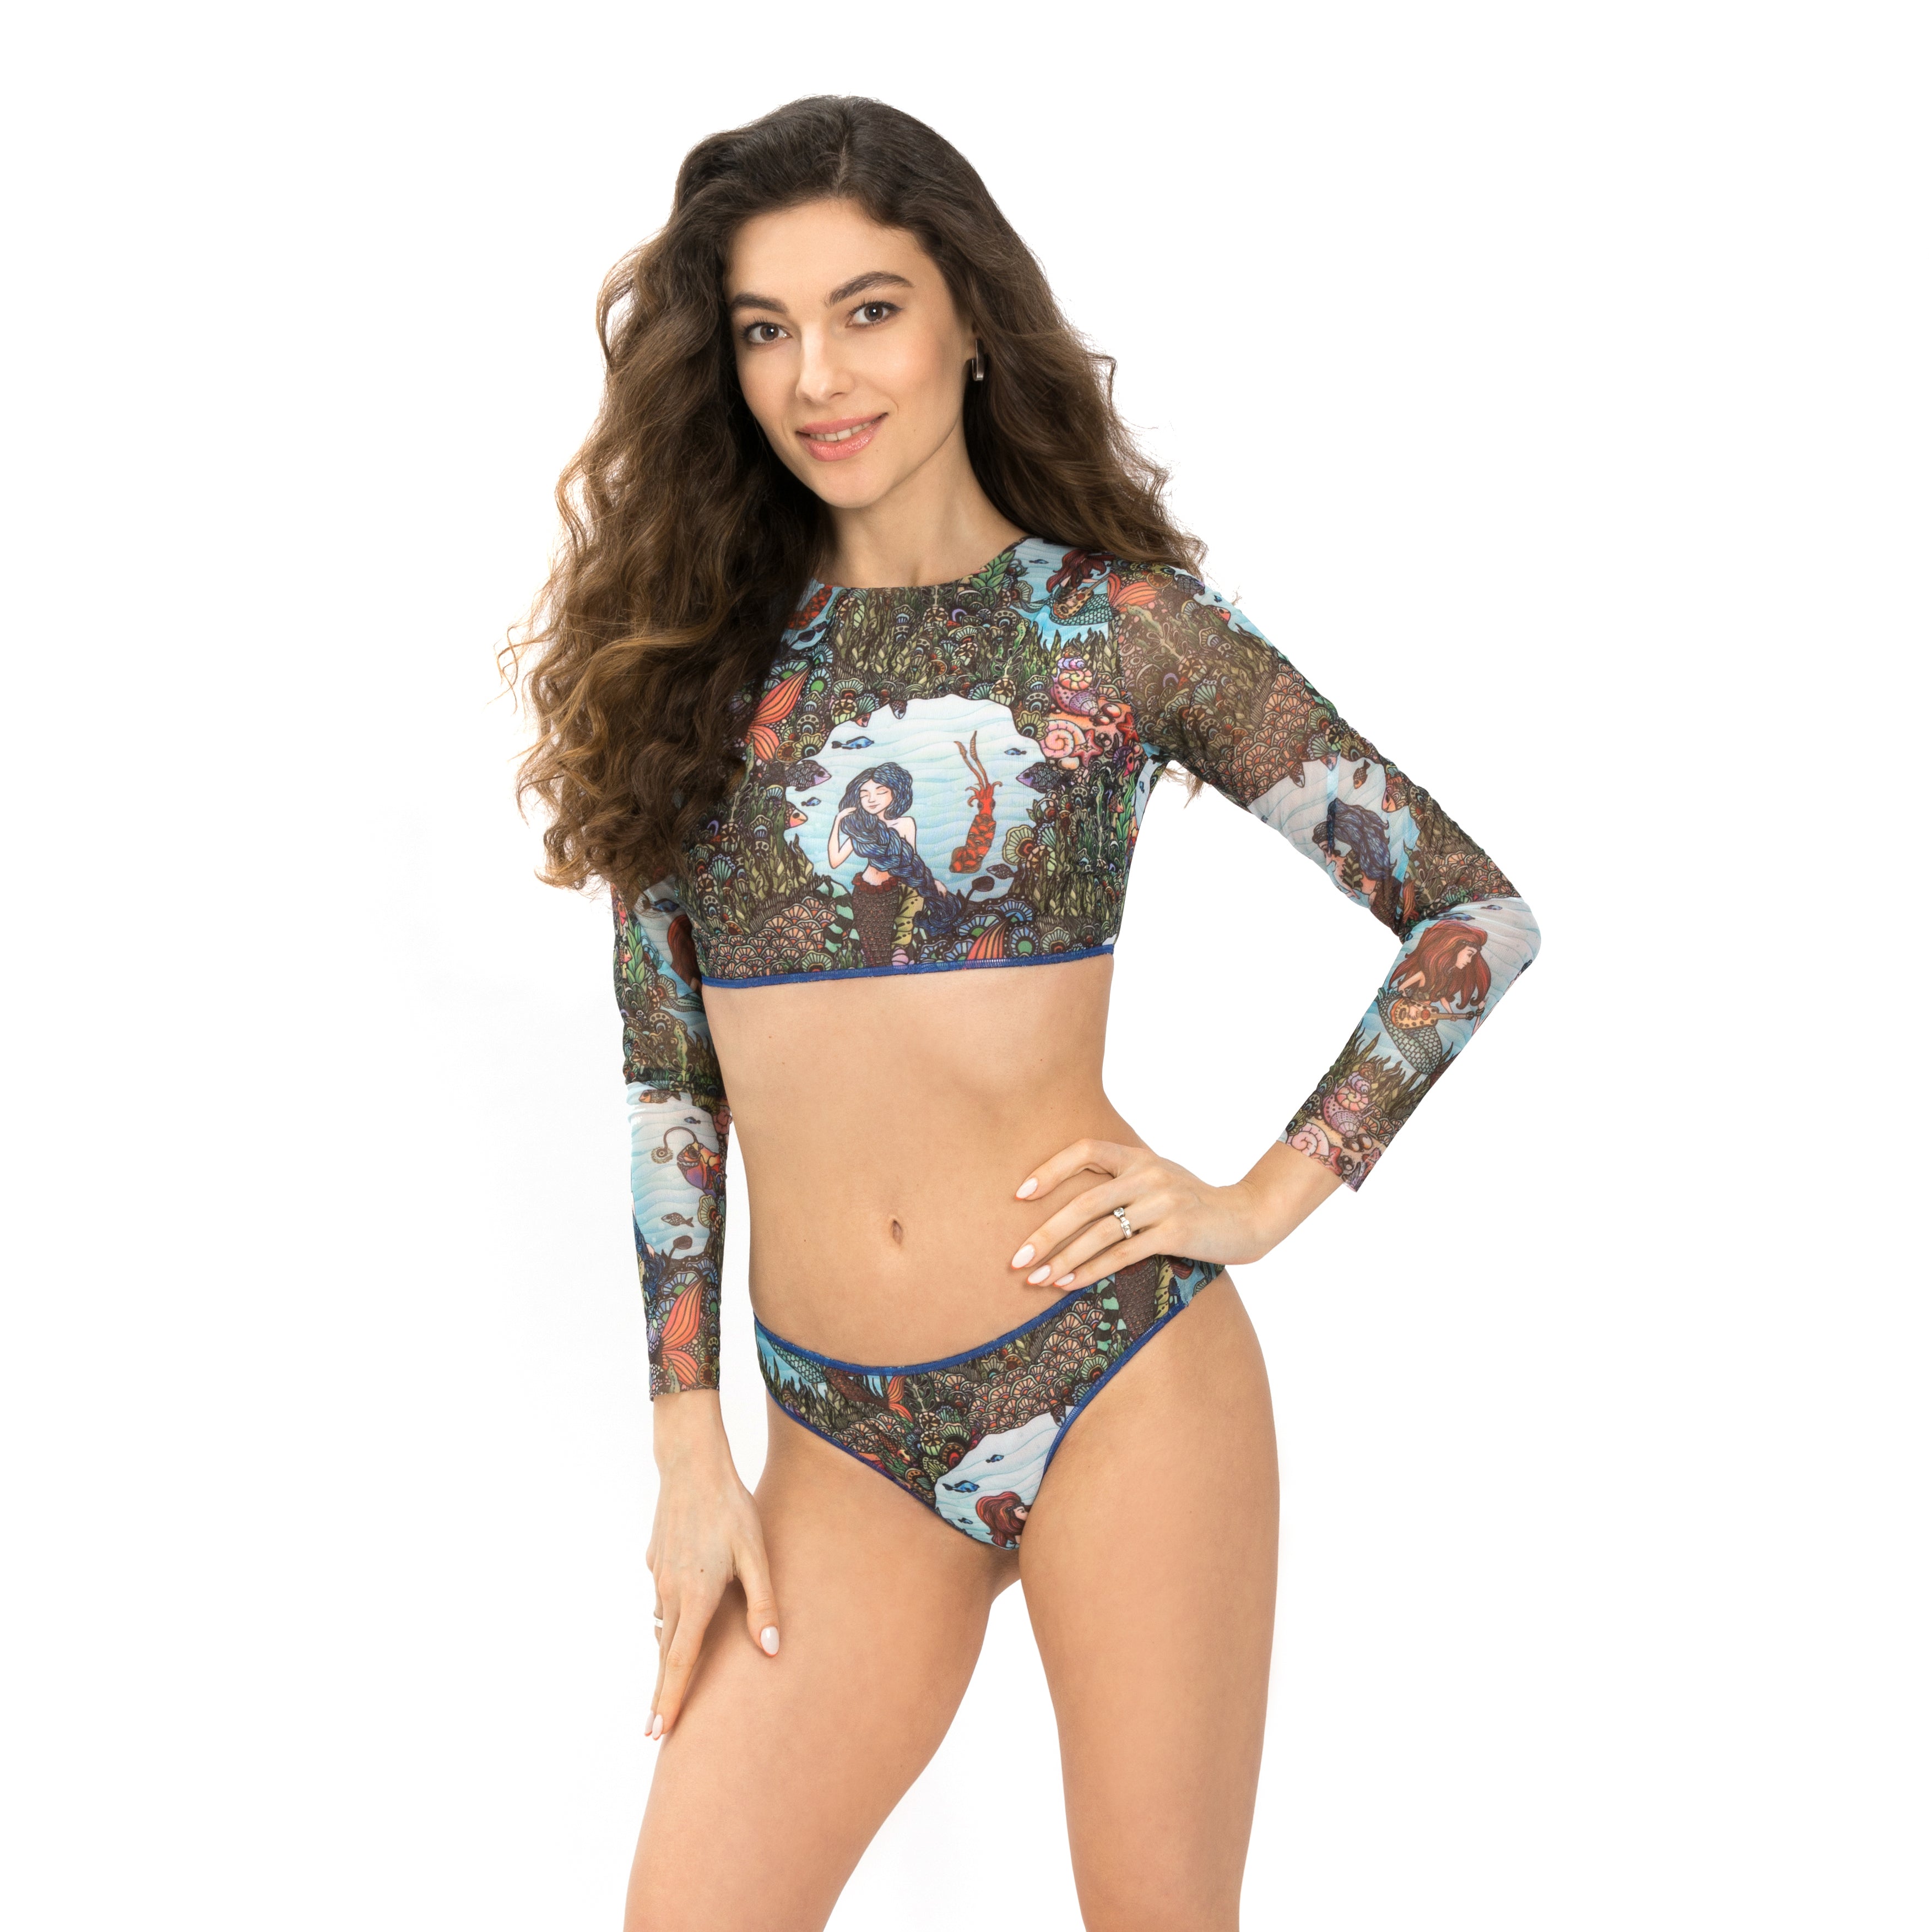 Explore our sustainable tan-through swimwear line featuring a chic mermaid print. This top with sleeves offers SPF35 protection and ensures an impeccable fit for a luxurious beach outing. Click to shop now!